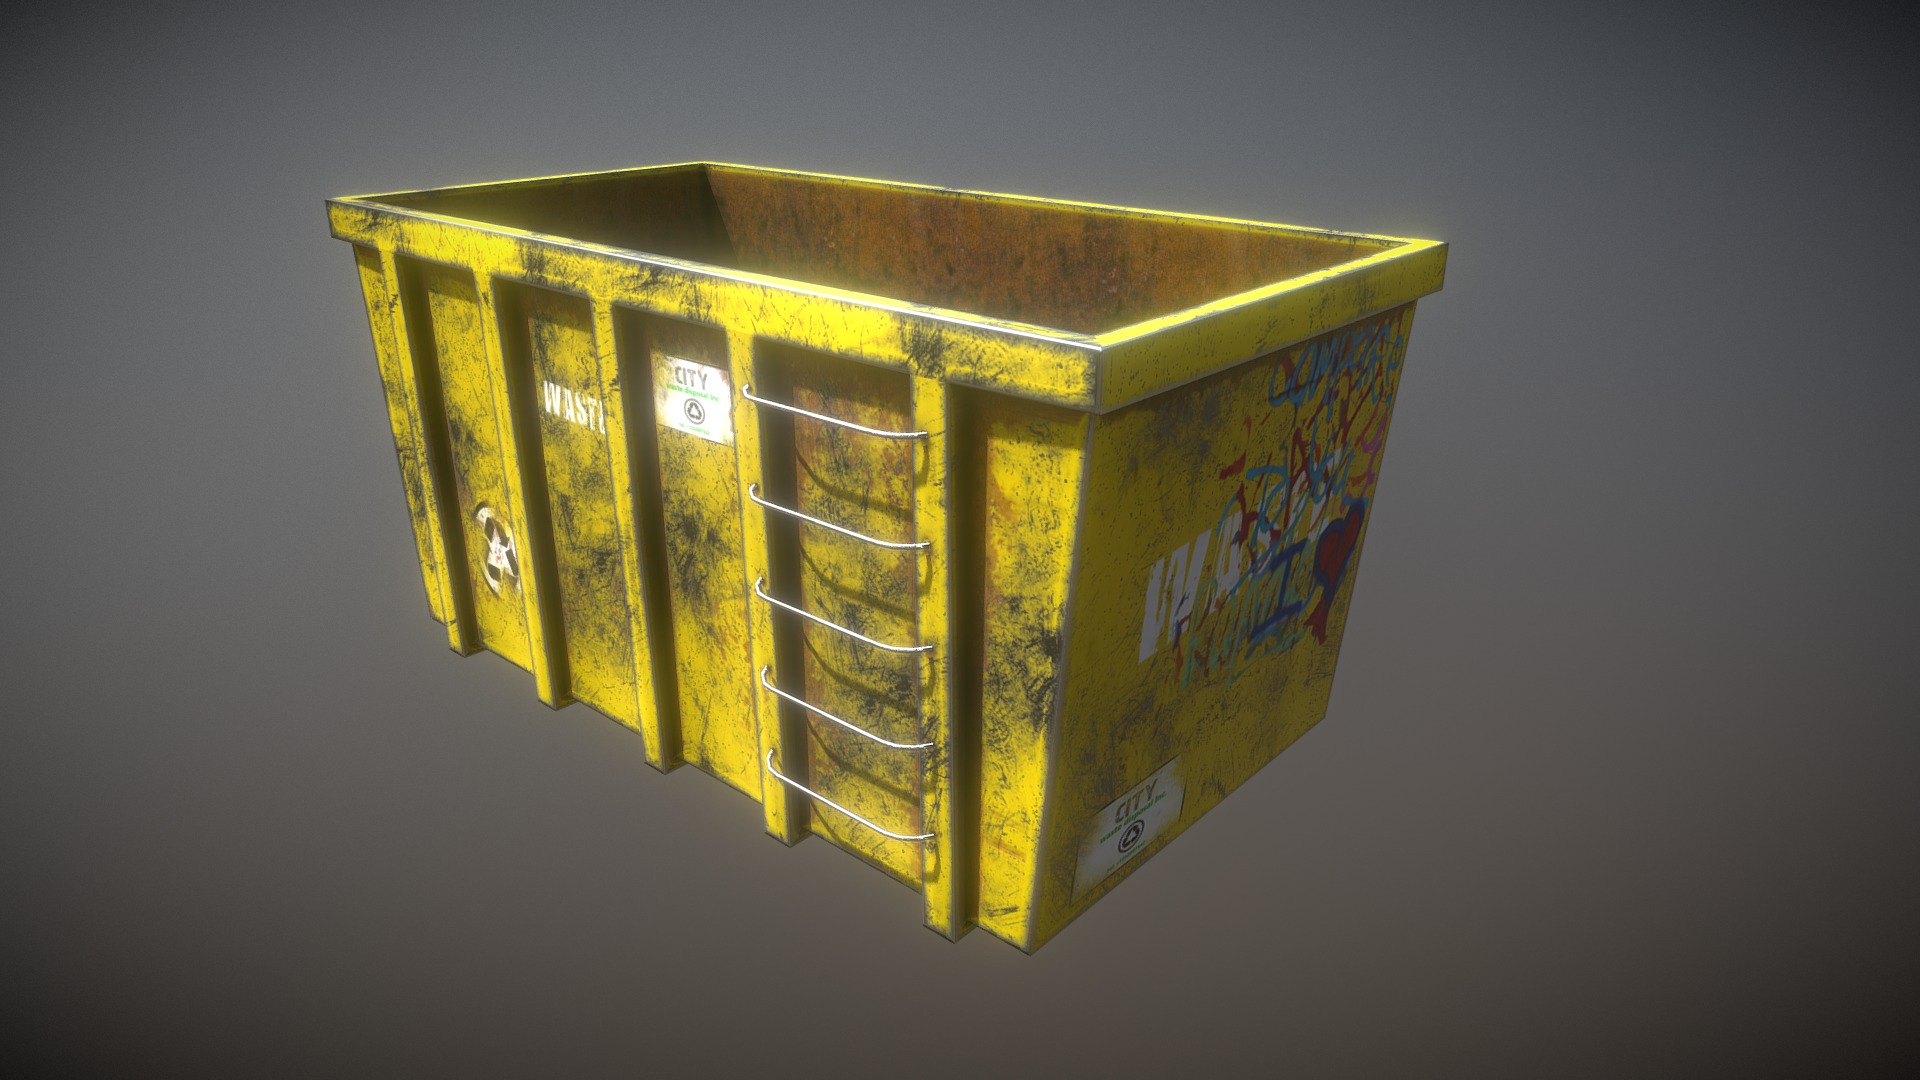 3D model Garbage container - This is a 3D model of the Garbage container. The 3D model is about a yellow box with a light inside.